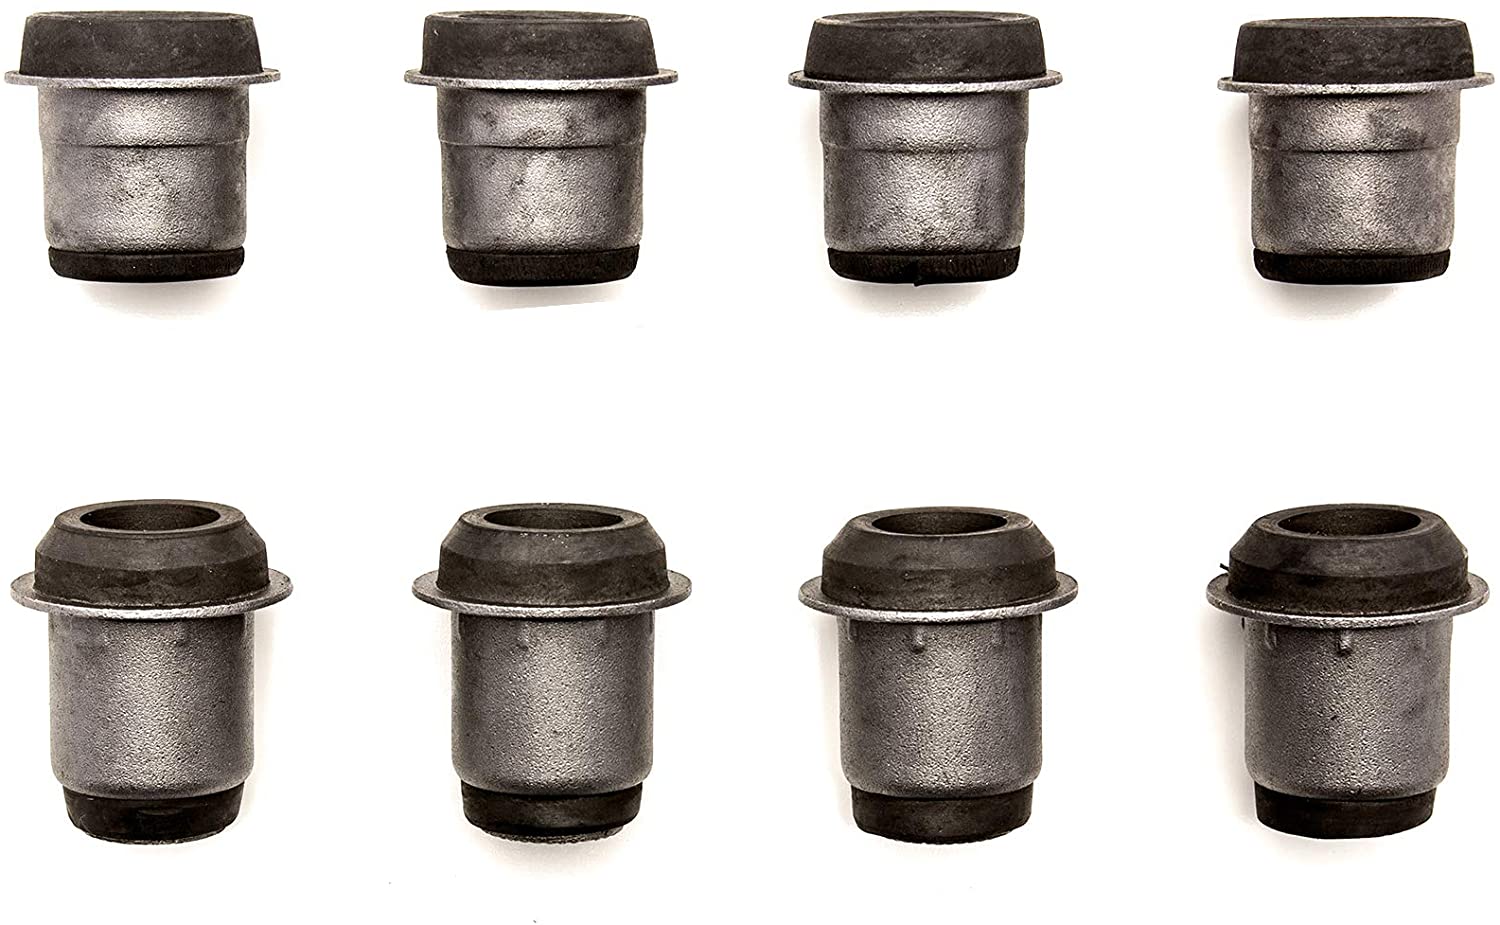 Andersen Restorations Upper Lower Control Arm Bushings Compatible with Ford/Mercury/Edsel Full Size/Thunderbird OEM Spec Replacements (8 Piece Kit)